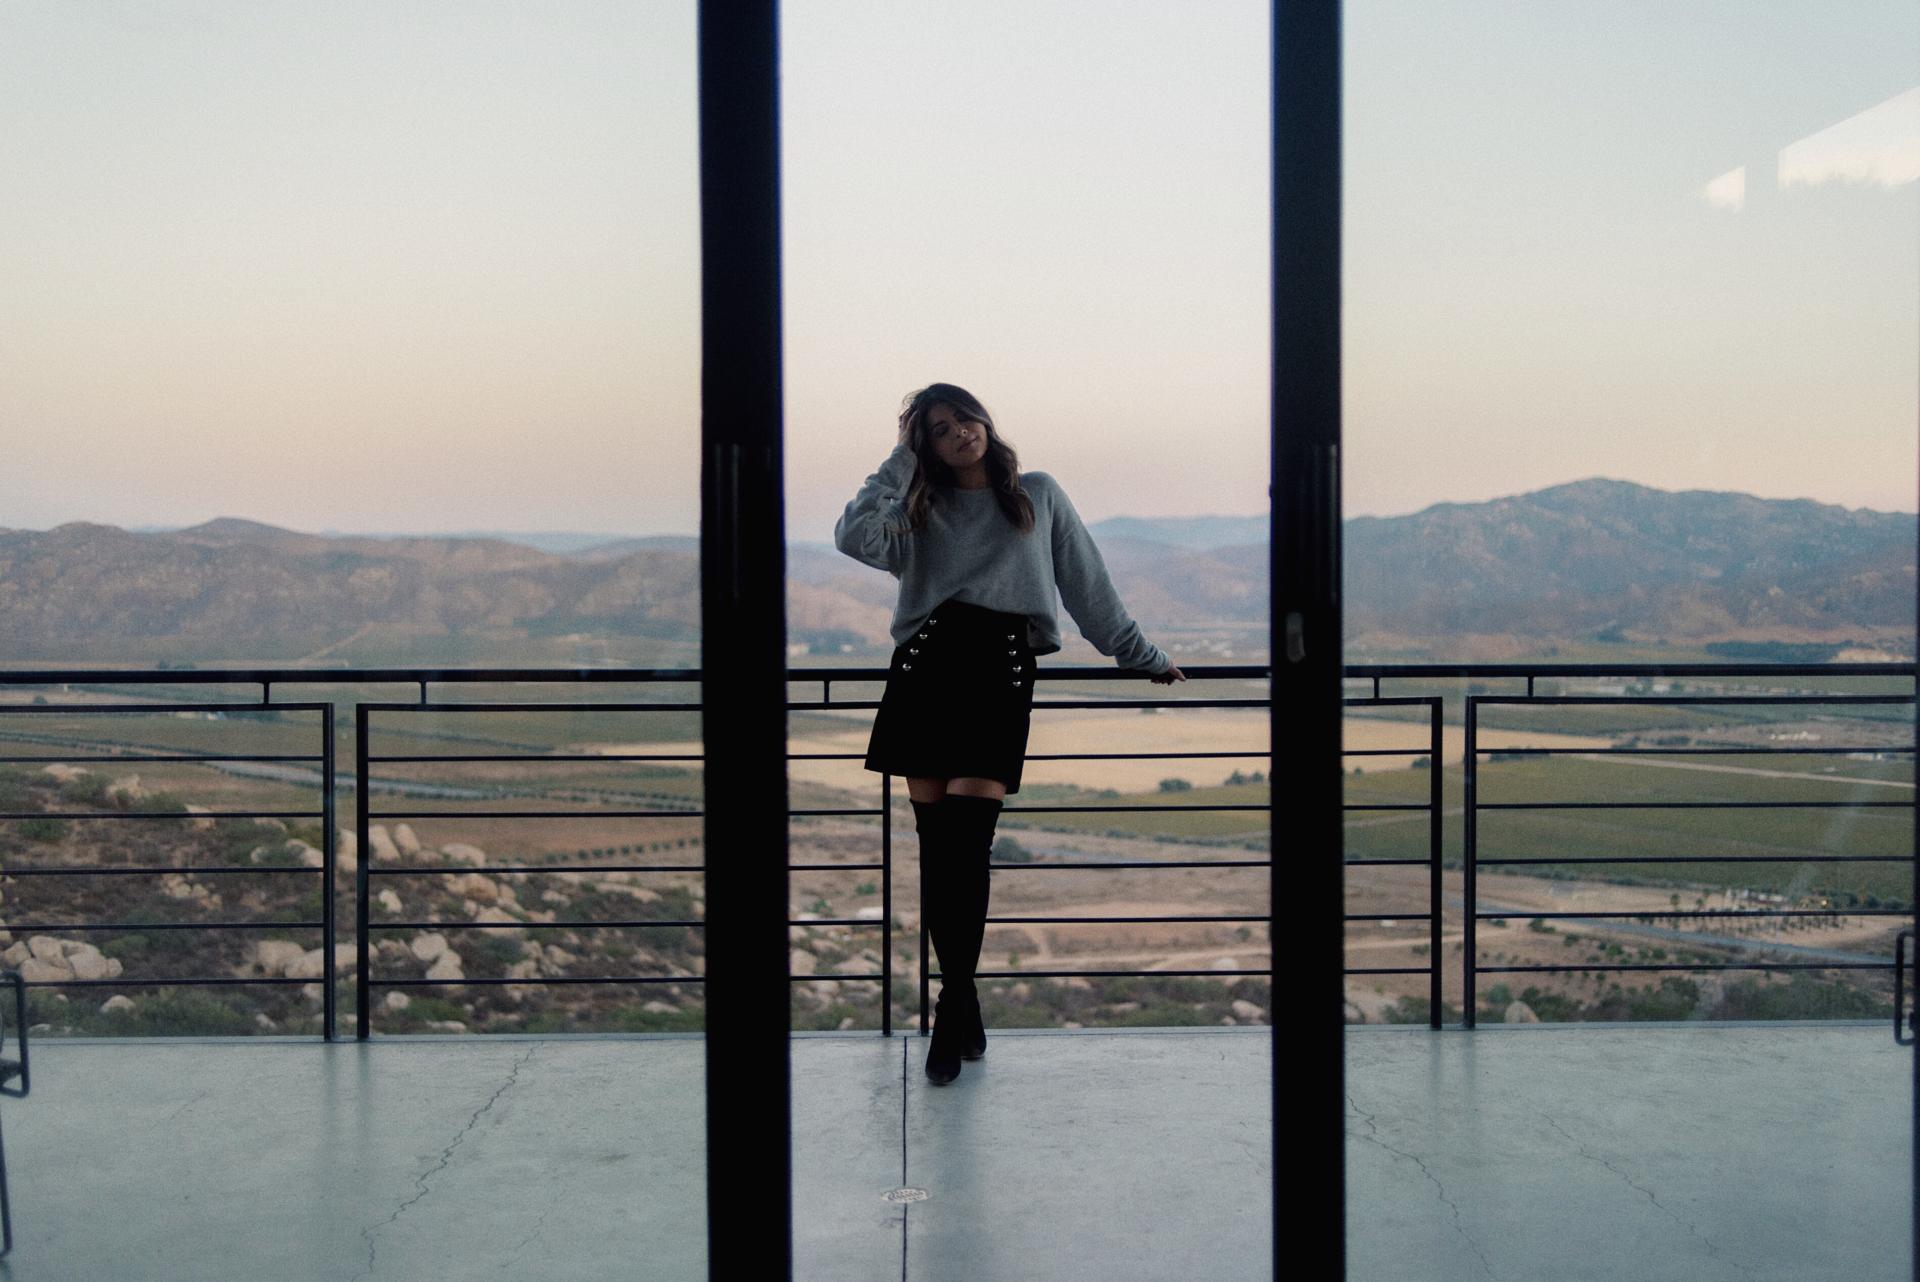 Pam Hetlinger wearing a grey sweater, black skirt and over the knee boots during a sunset in Valle de Guadalupe